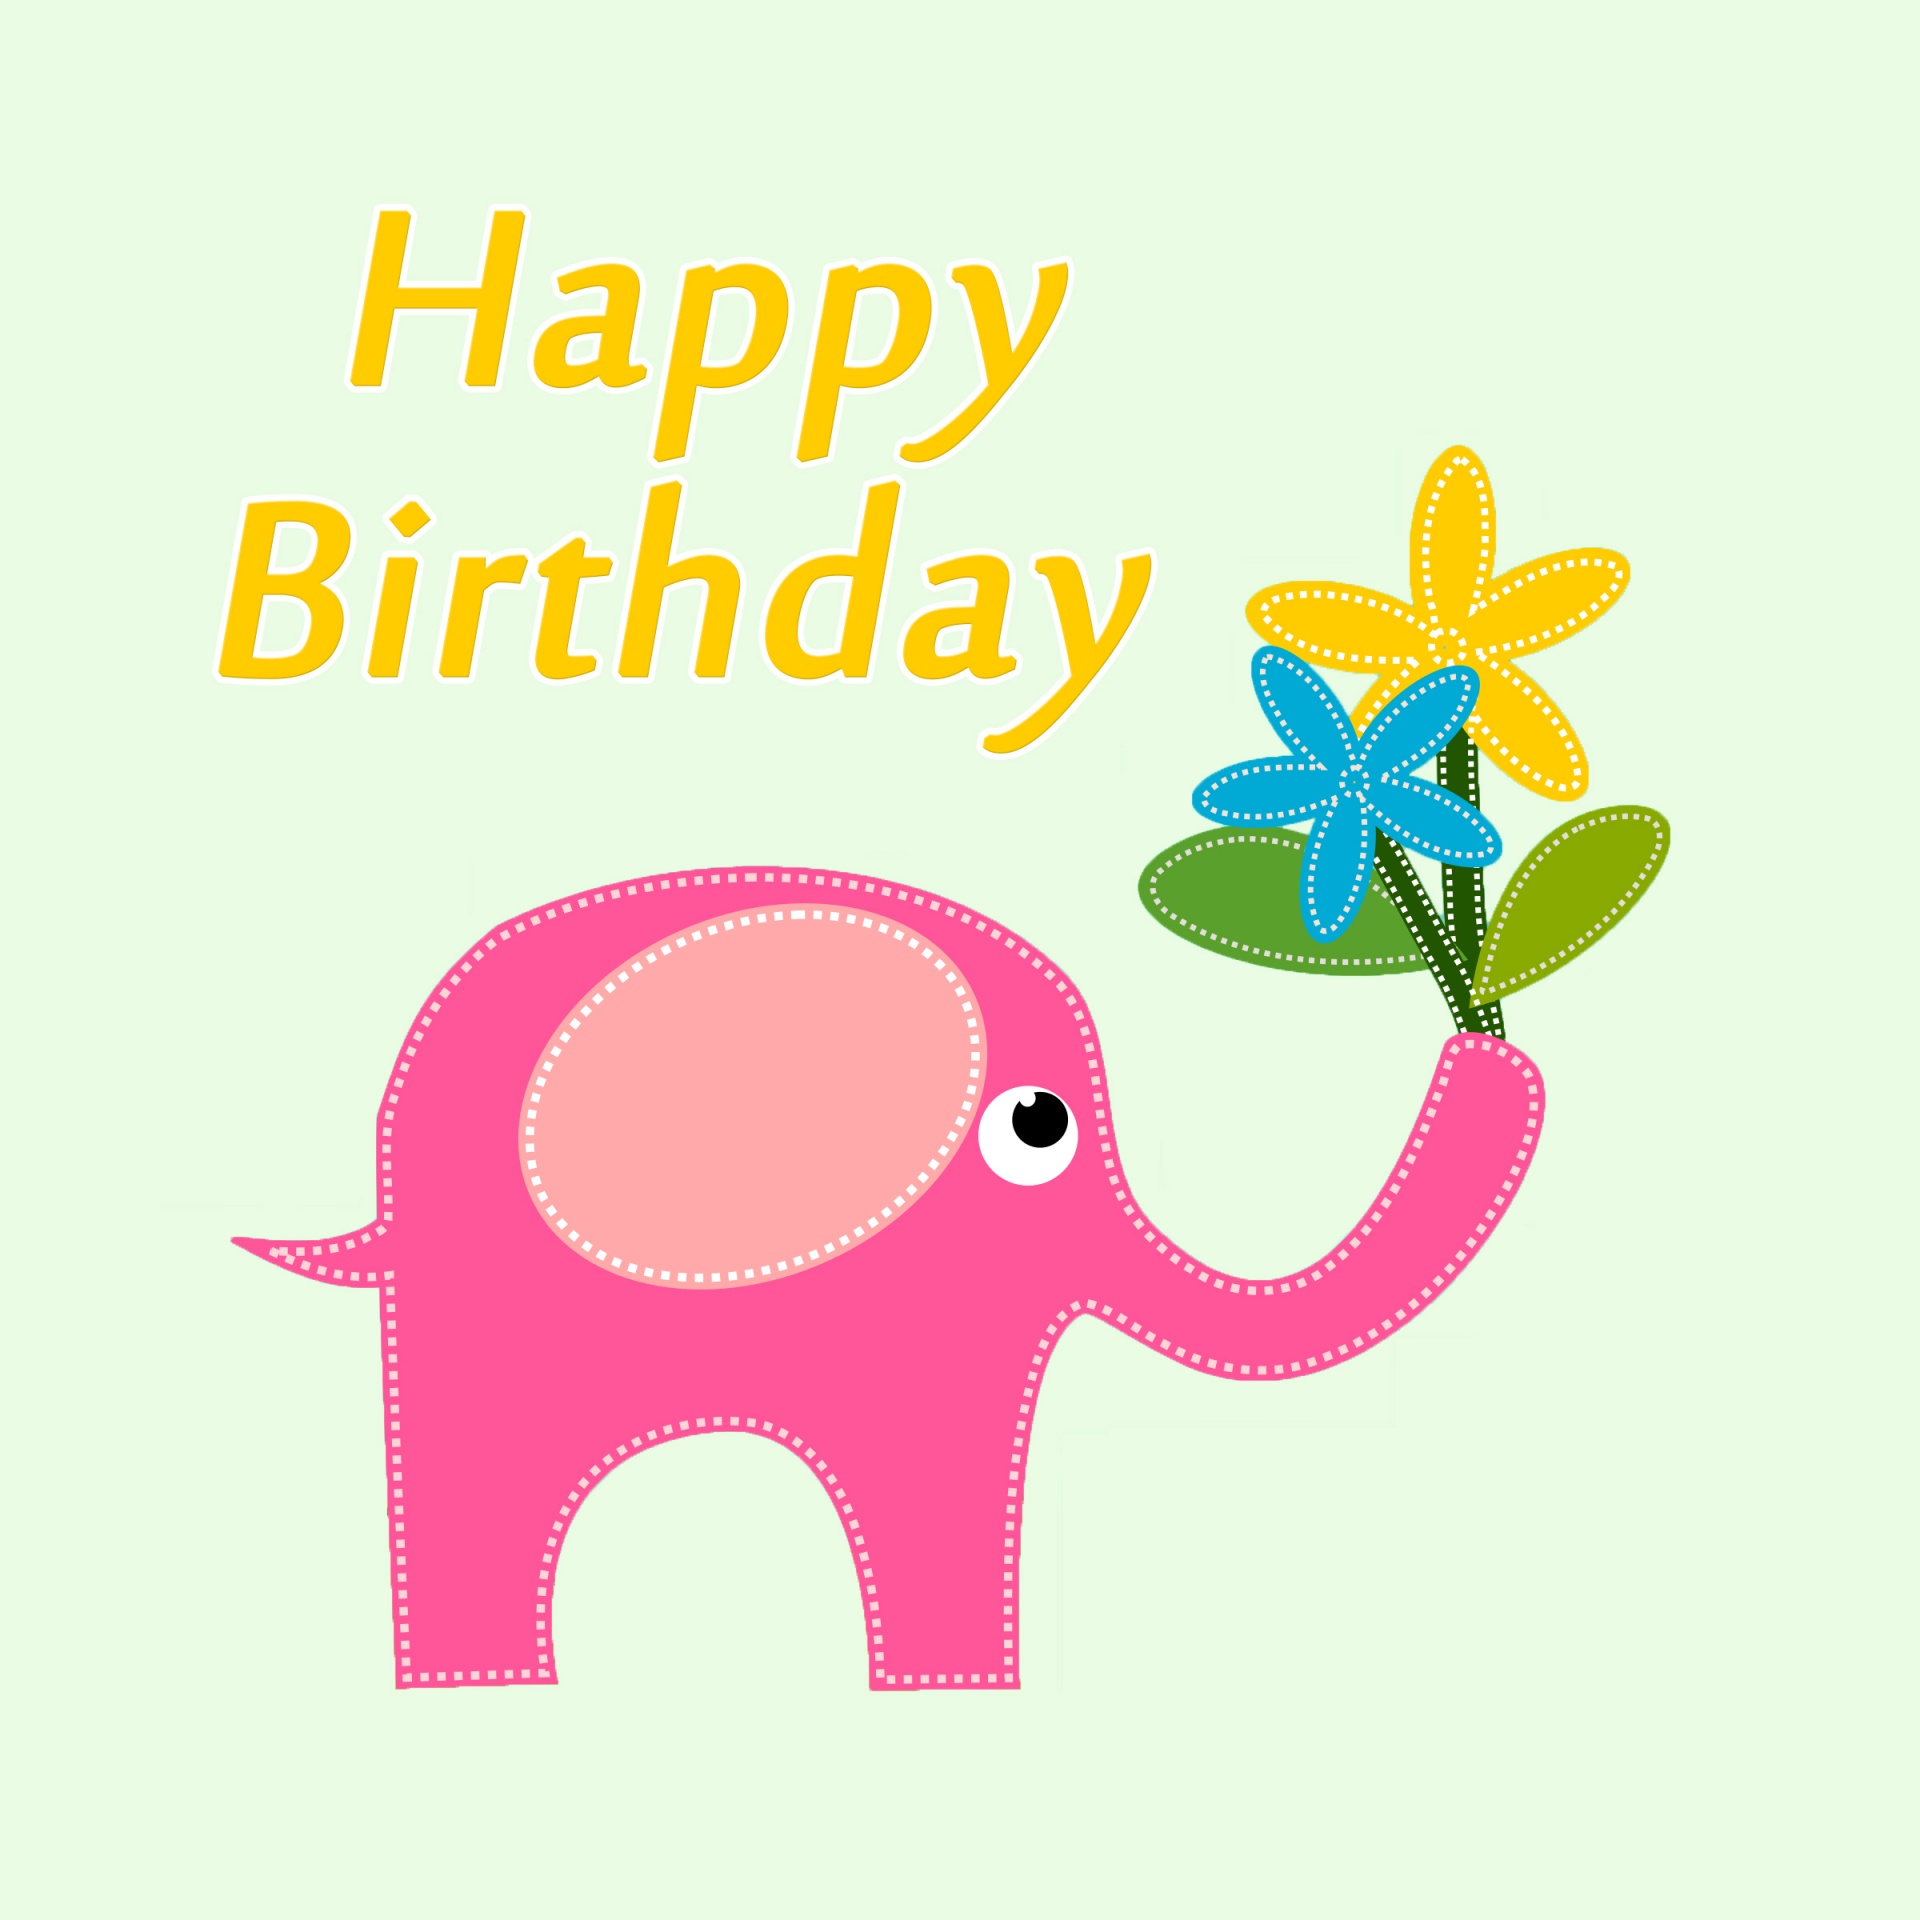 elephant-birthday-card-free-stock-photo-public-domain-pictures